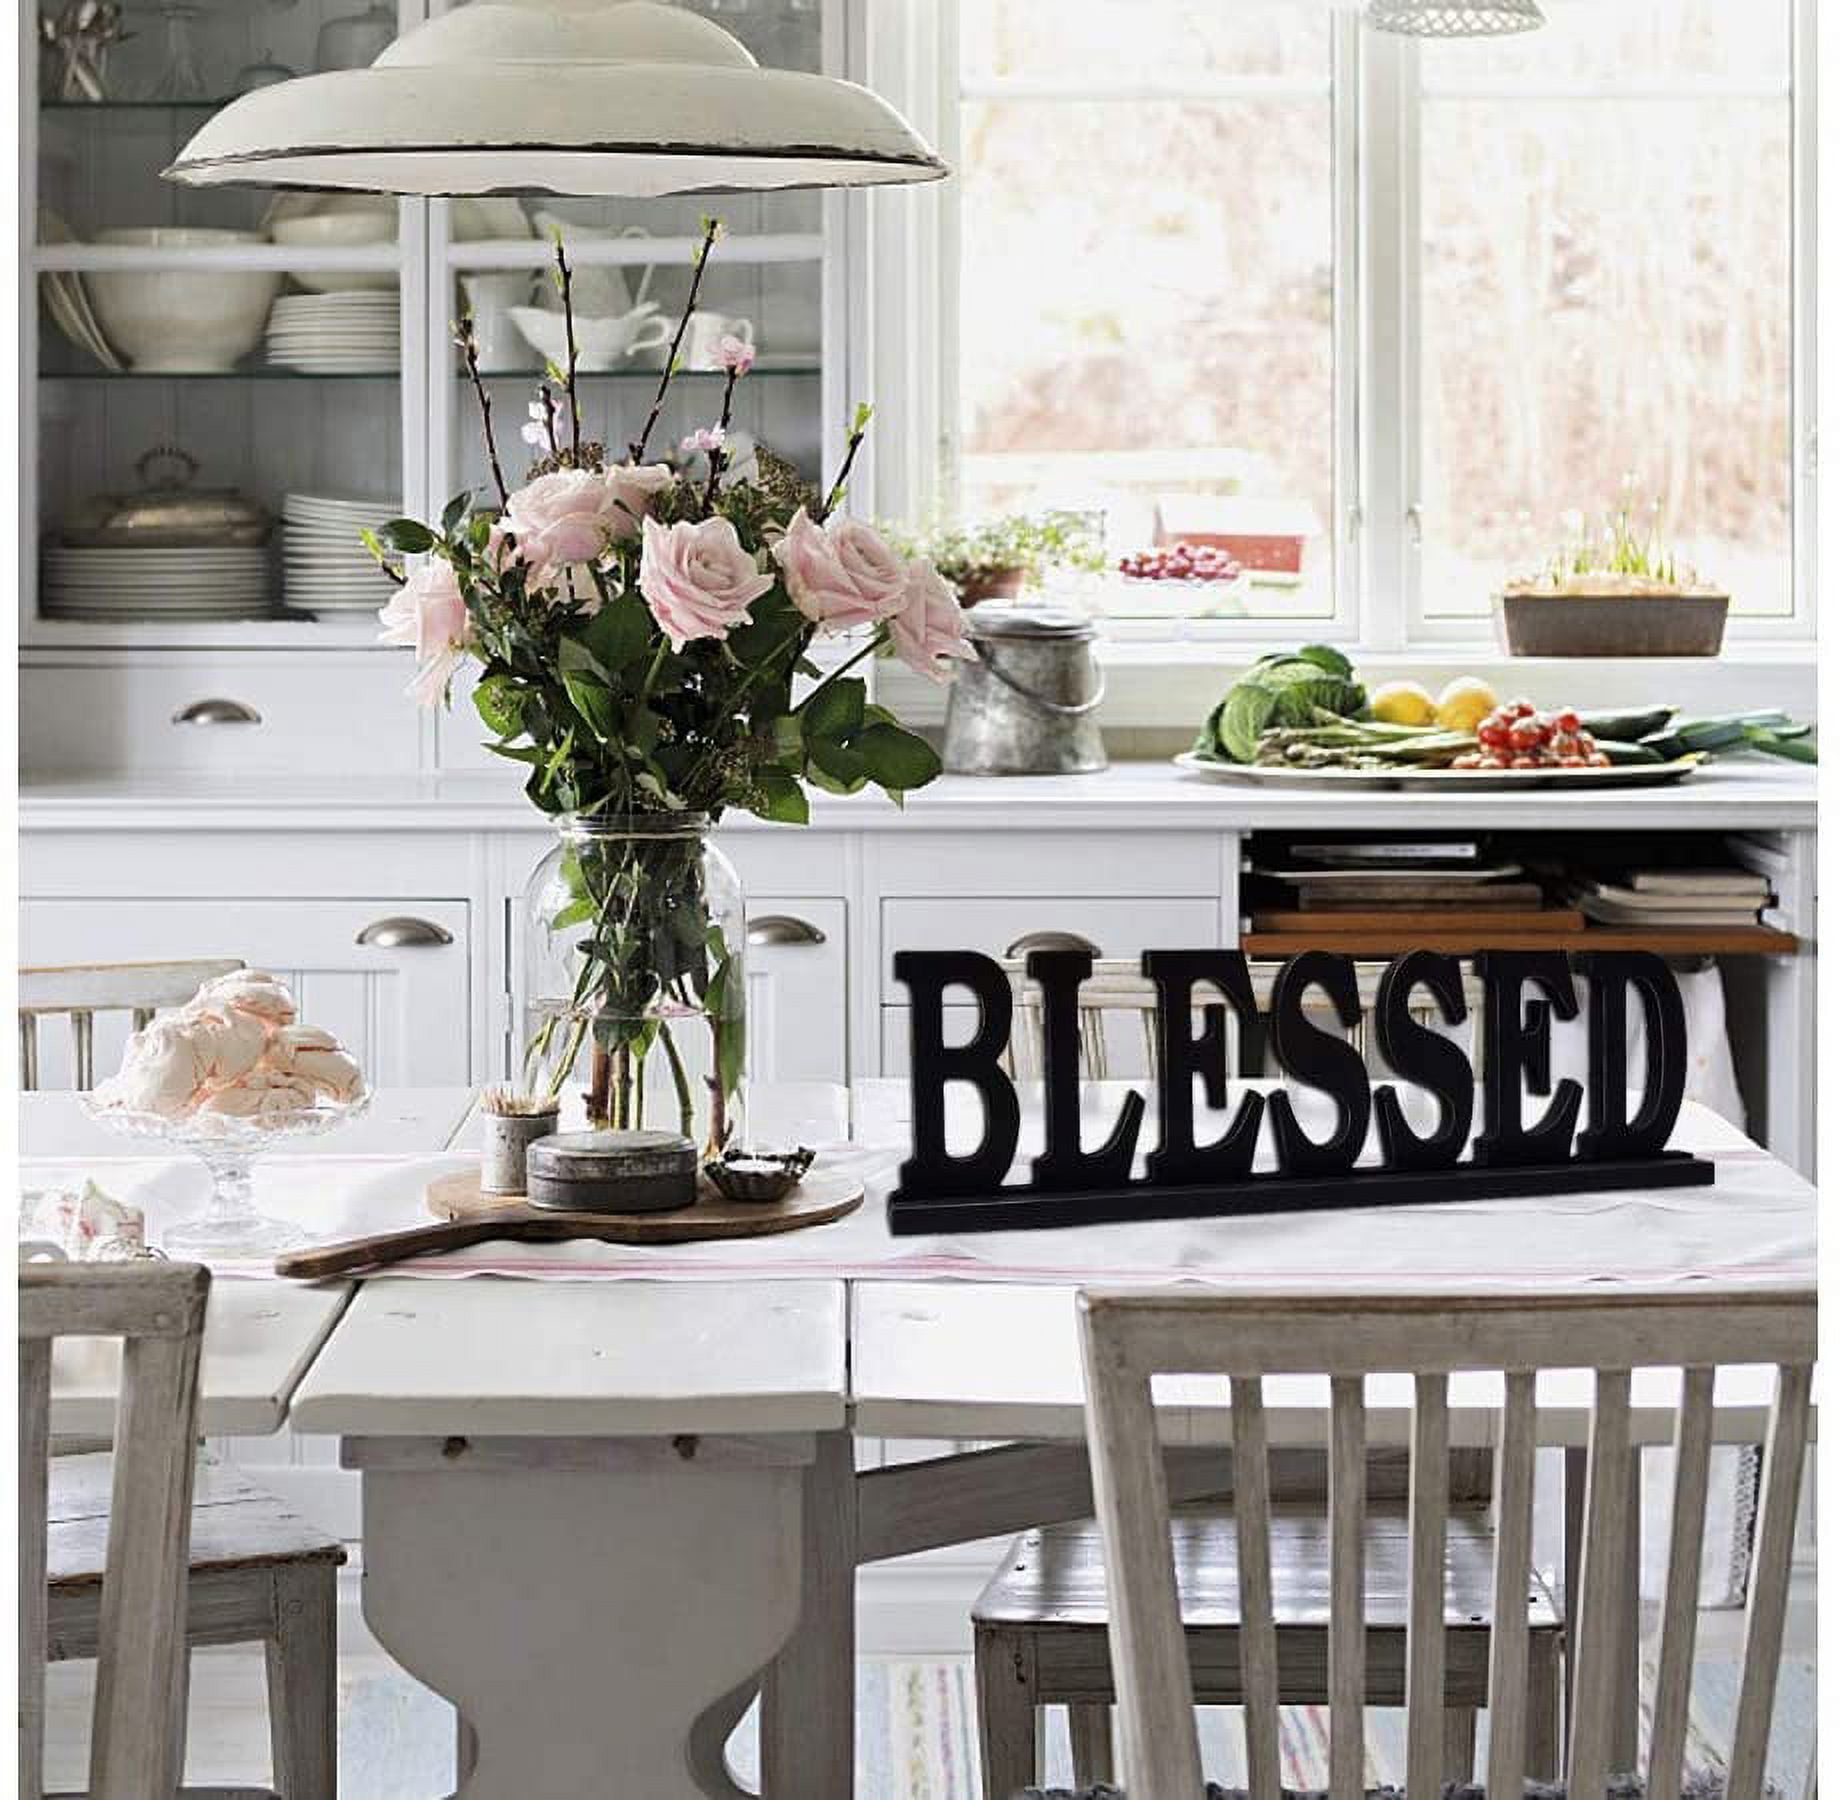 Grace Home wood kitchen tabletop sign for home decor, wooden block letters  kitchen sign rustic freestanding words house decoration